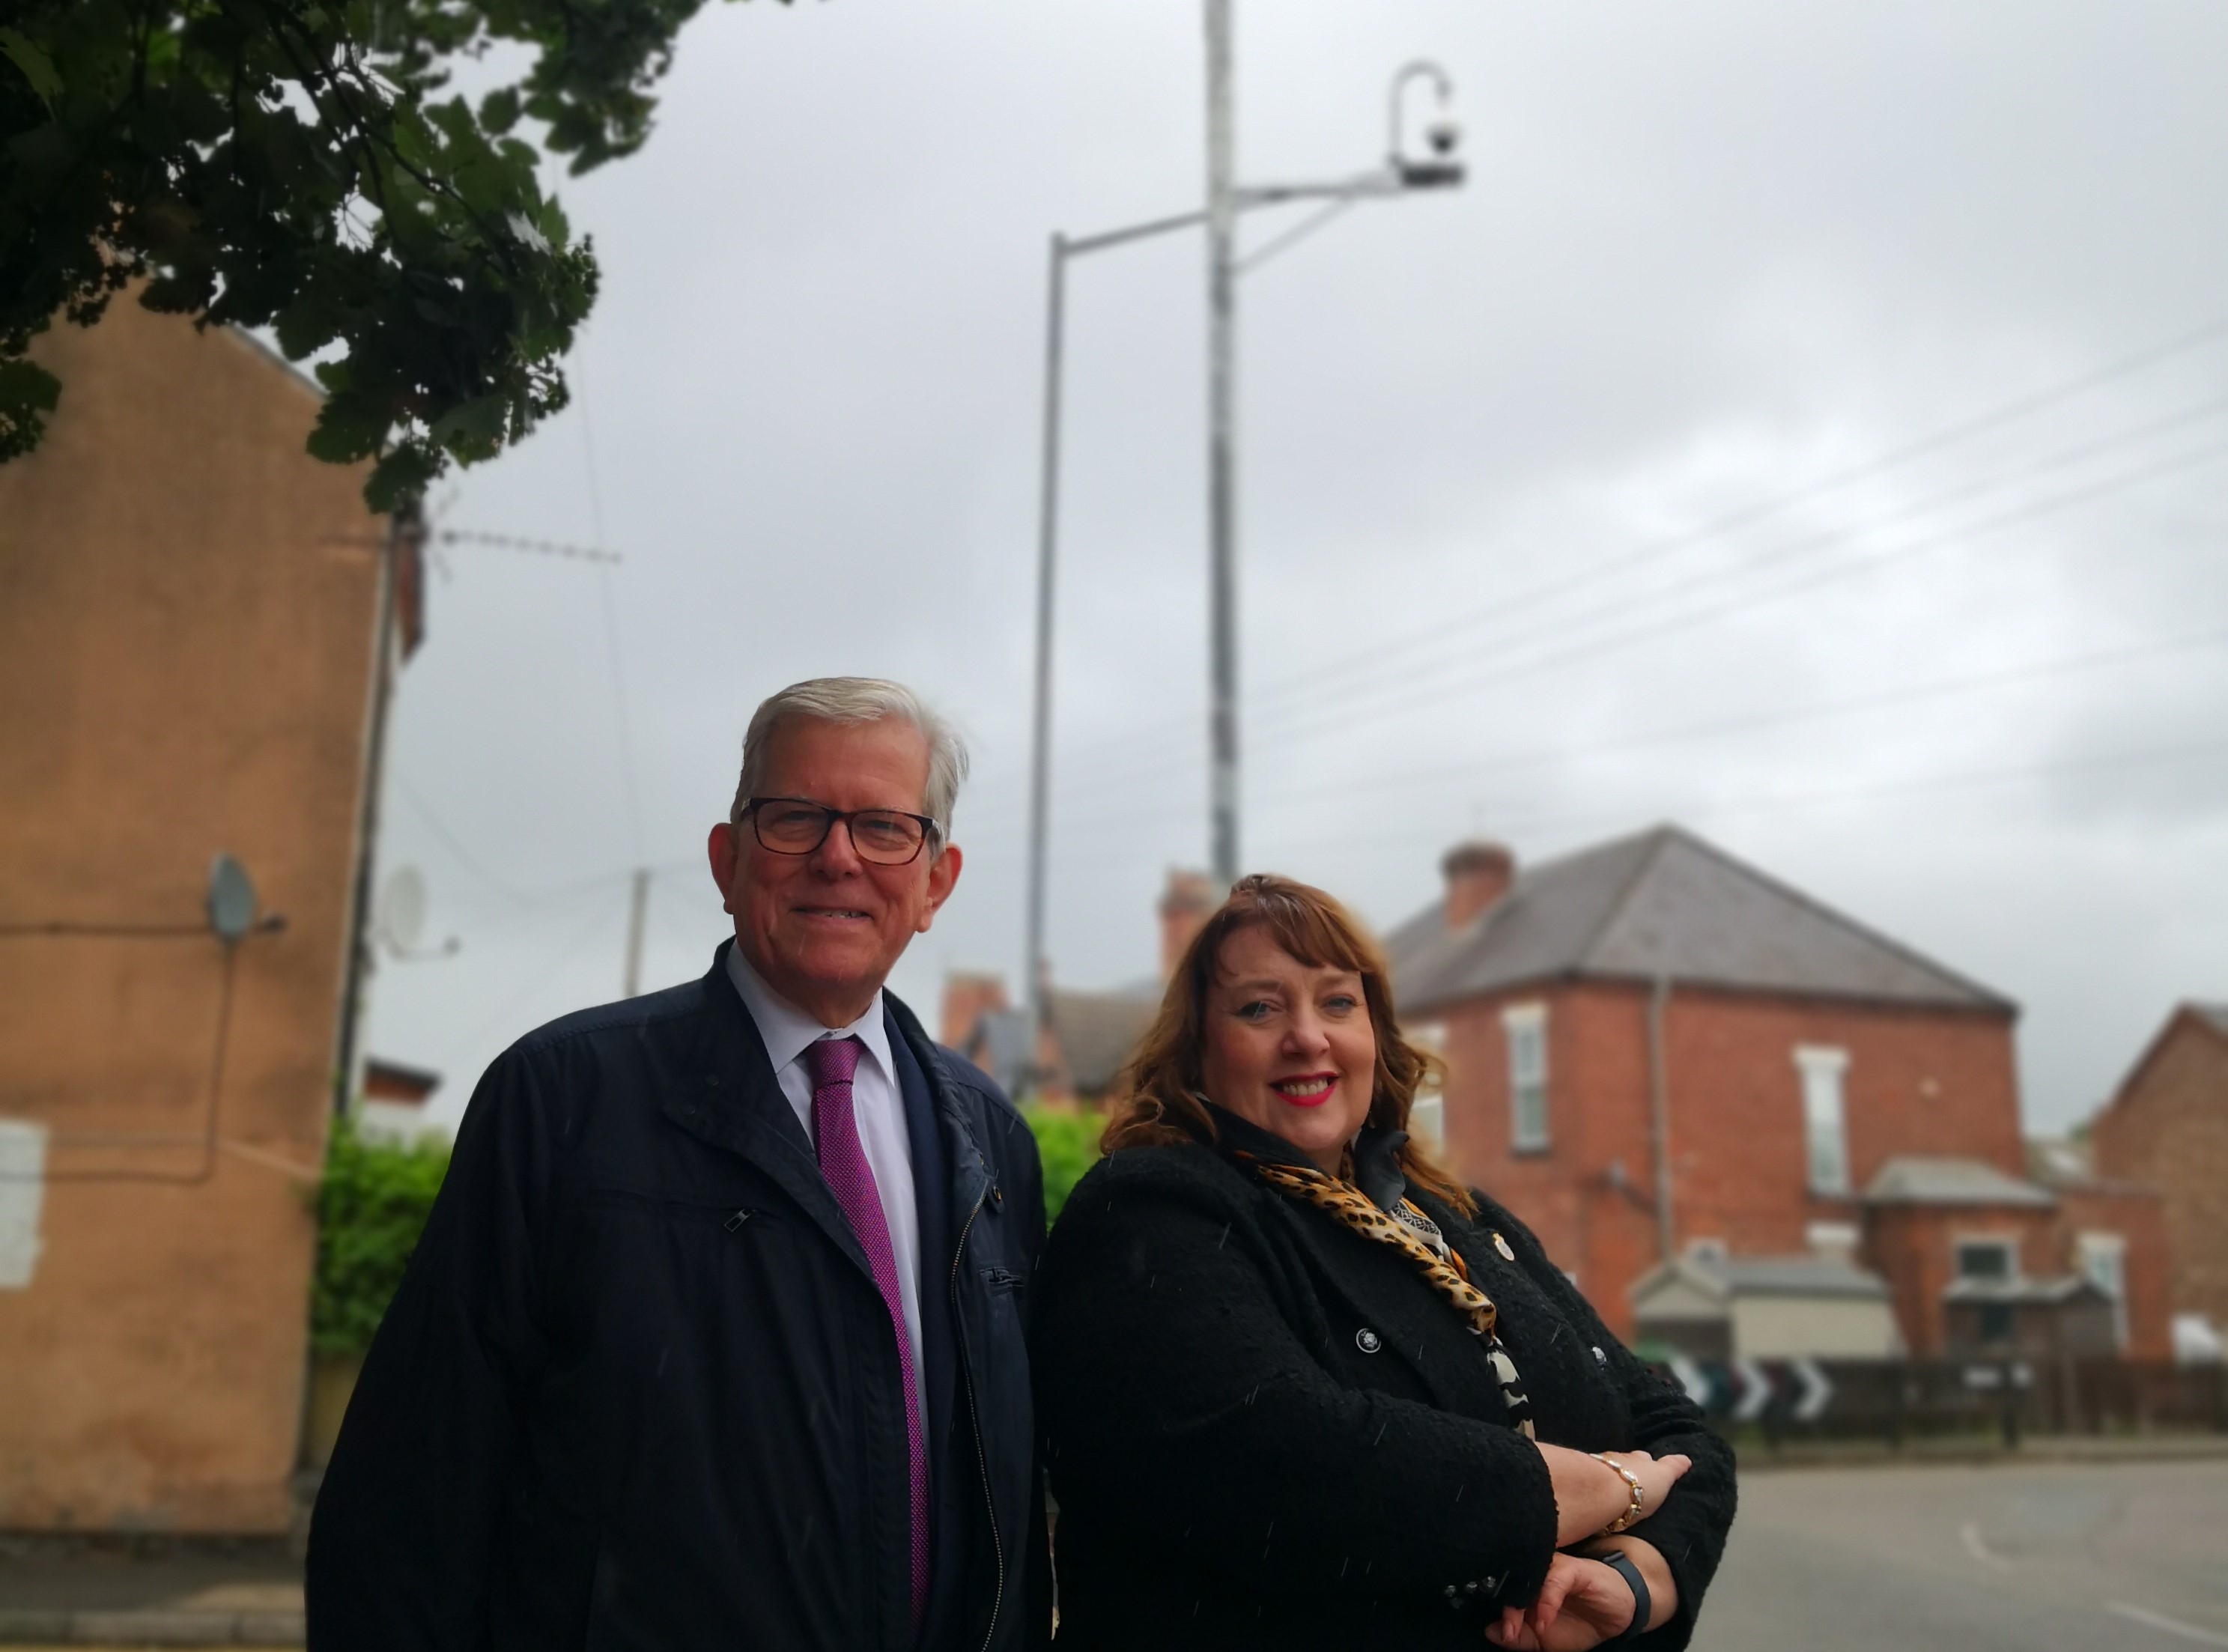 from left to right – Leader of Gedling Borough Council, Councillor John Clarke MBE with Nottinghamshire Police and Crime Commissioner Caroline Henry at the new CCTV Camera on the corner of Balmoral Road, Colwick. The camera is at the top of a large pole and is in the background slightly out of focus.